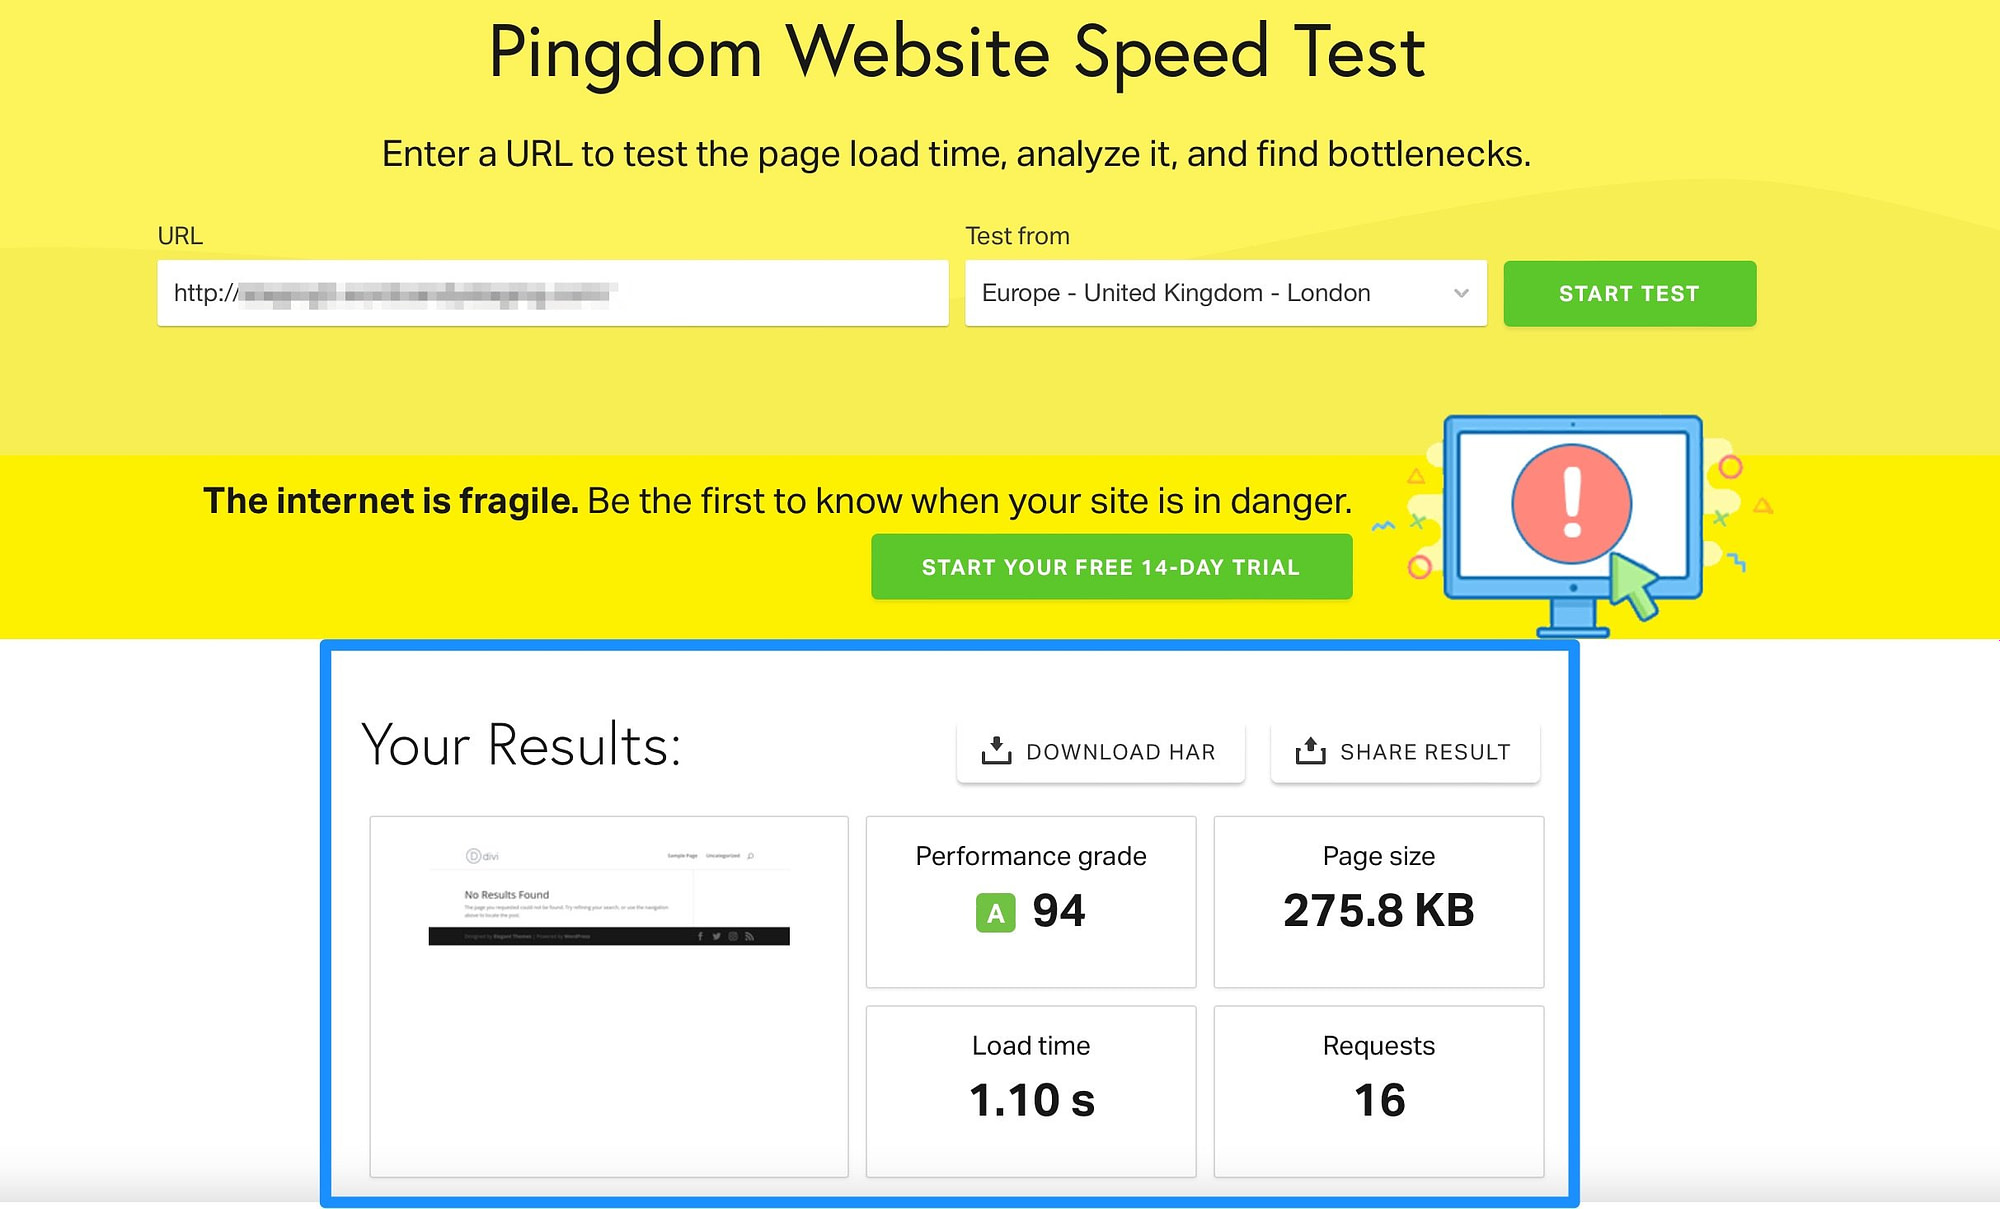 Pingdom website speed test results that we conducted as part of our Divi theme review.